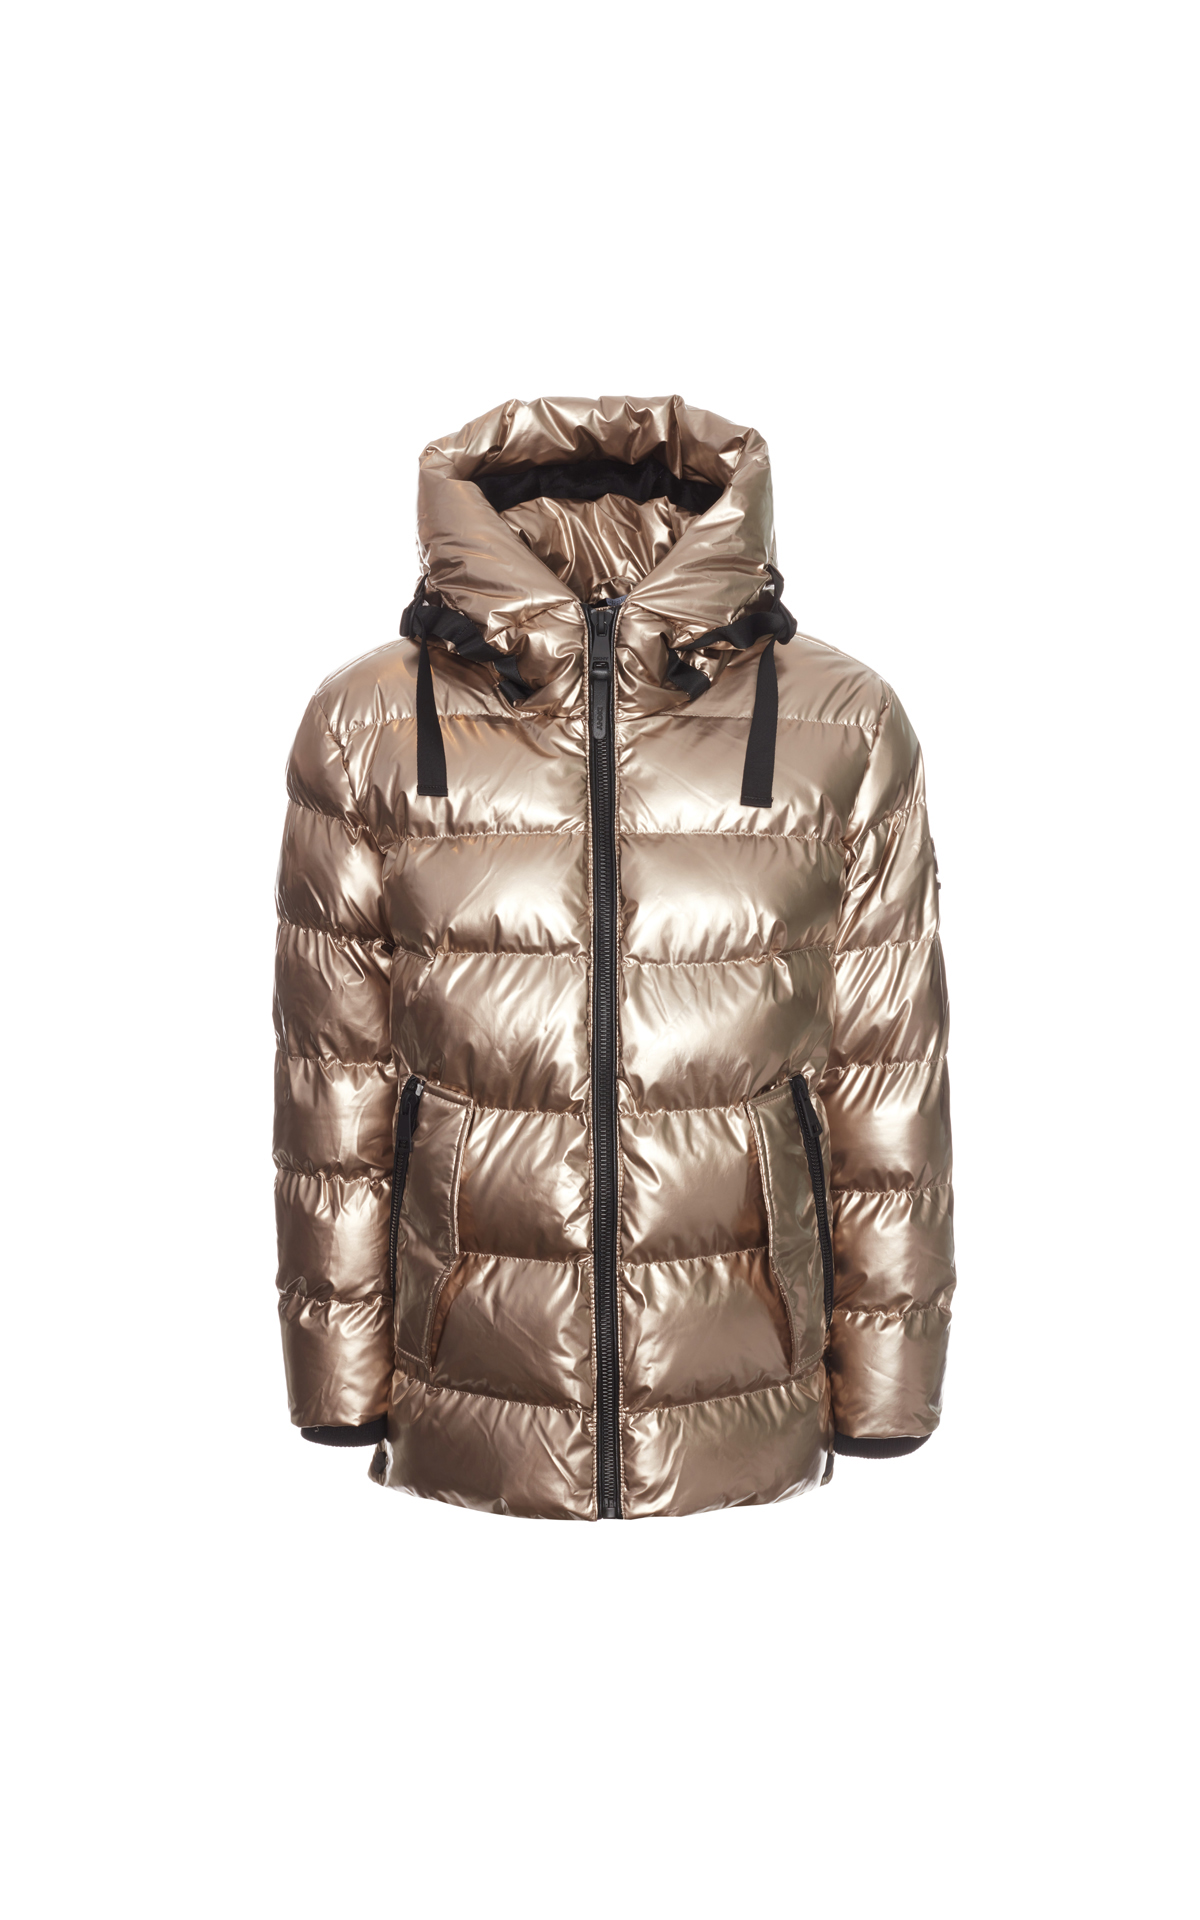 DKNY Gold puffer from Bicester Village